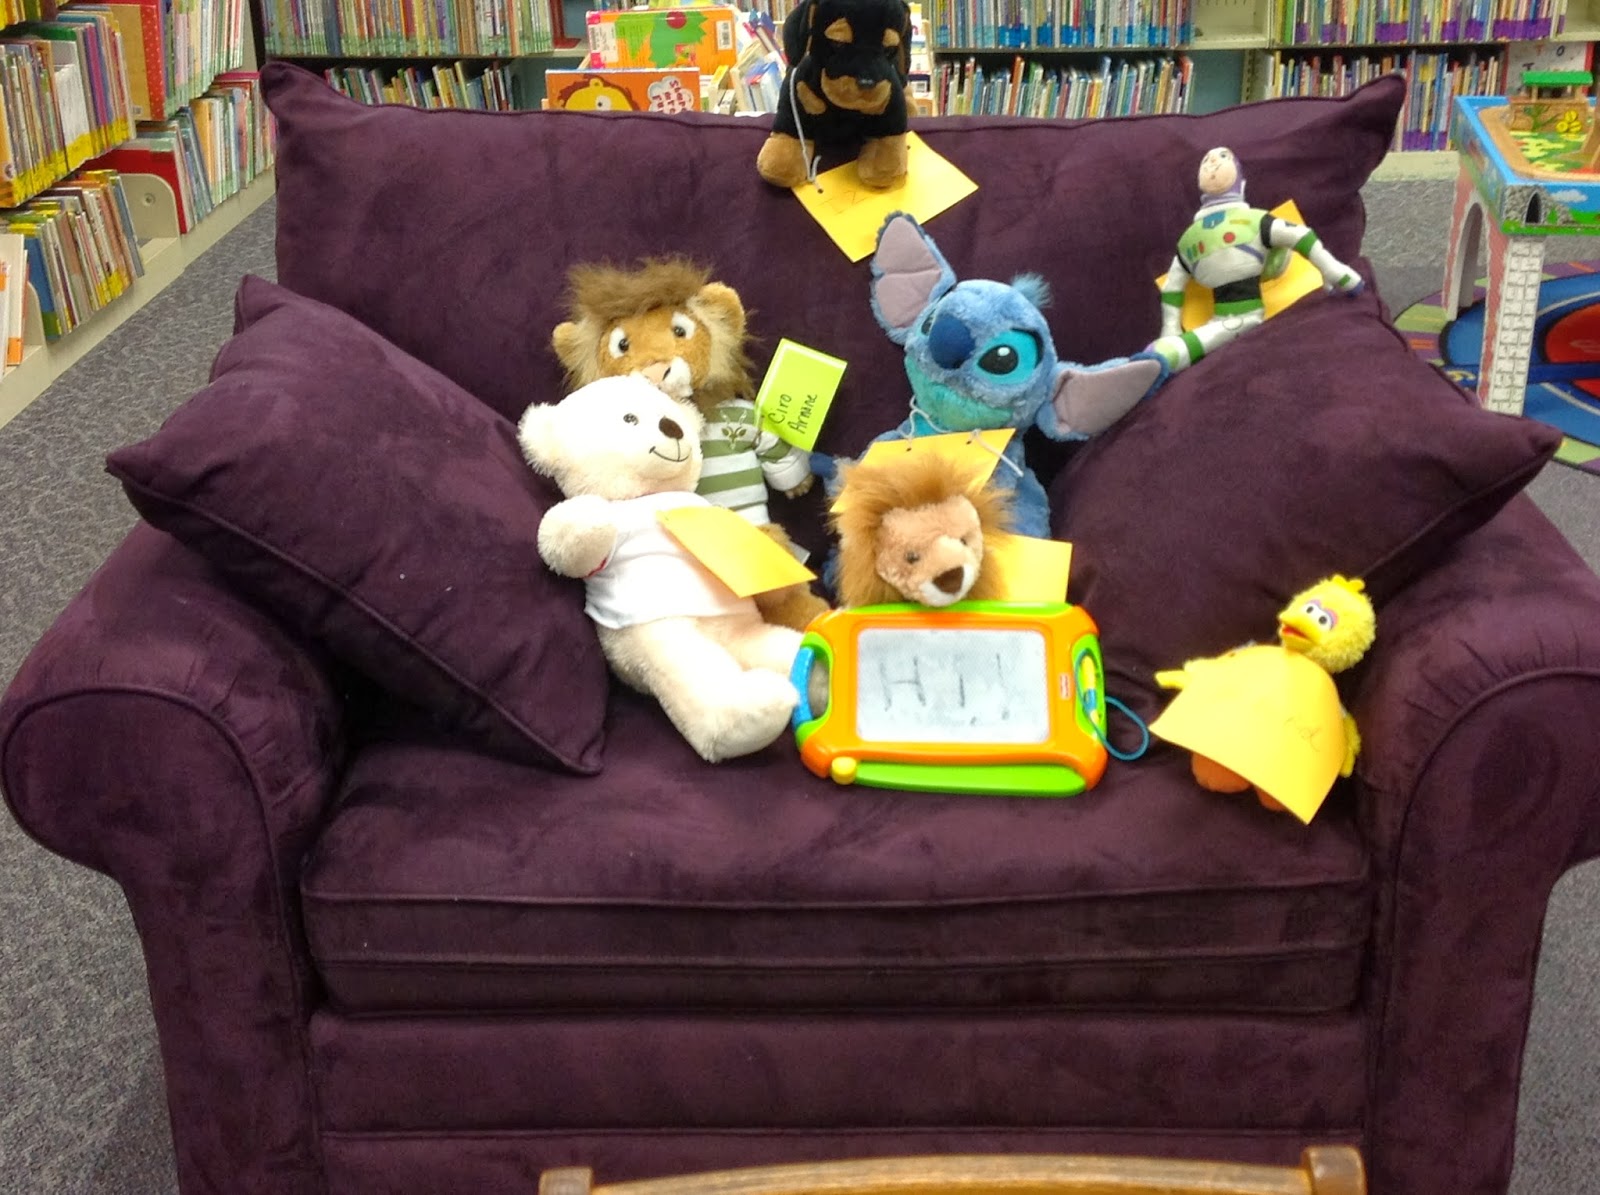 The Show Me Librarian: Make new friends with a Stuffed Animal Sleepover!